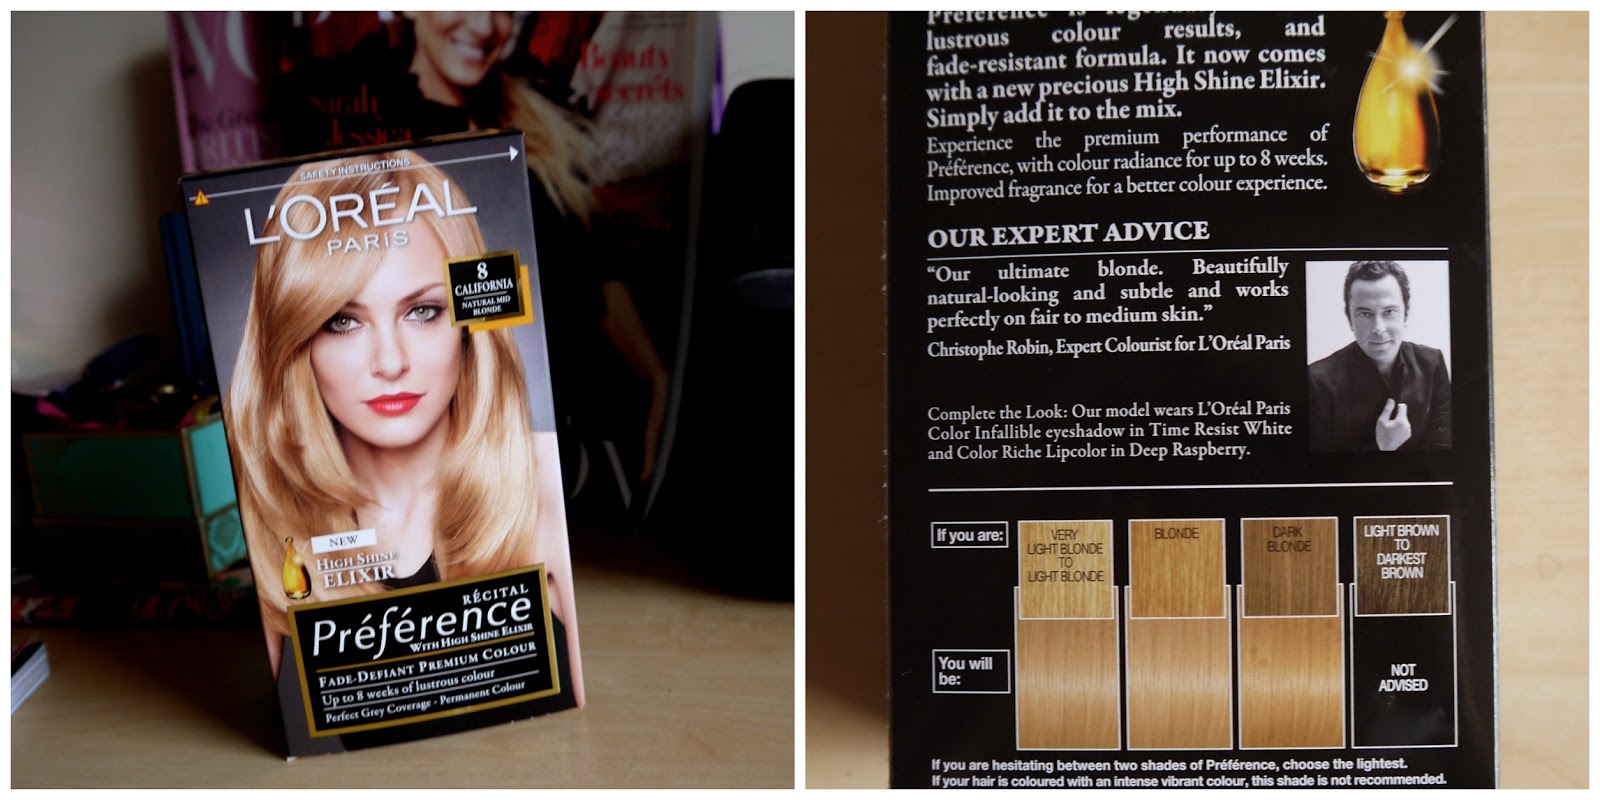 8. California Blonde Hair Products - wide 4